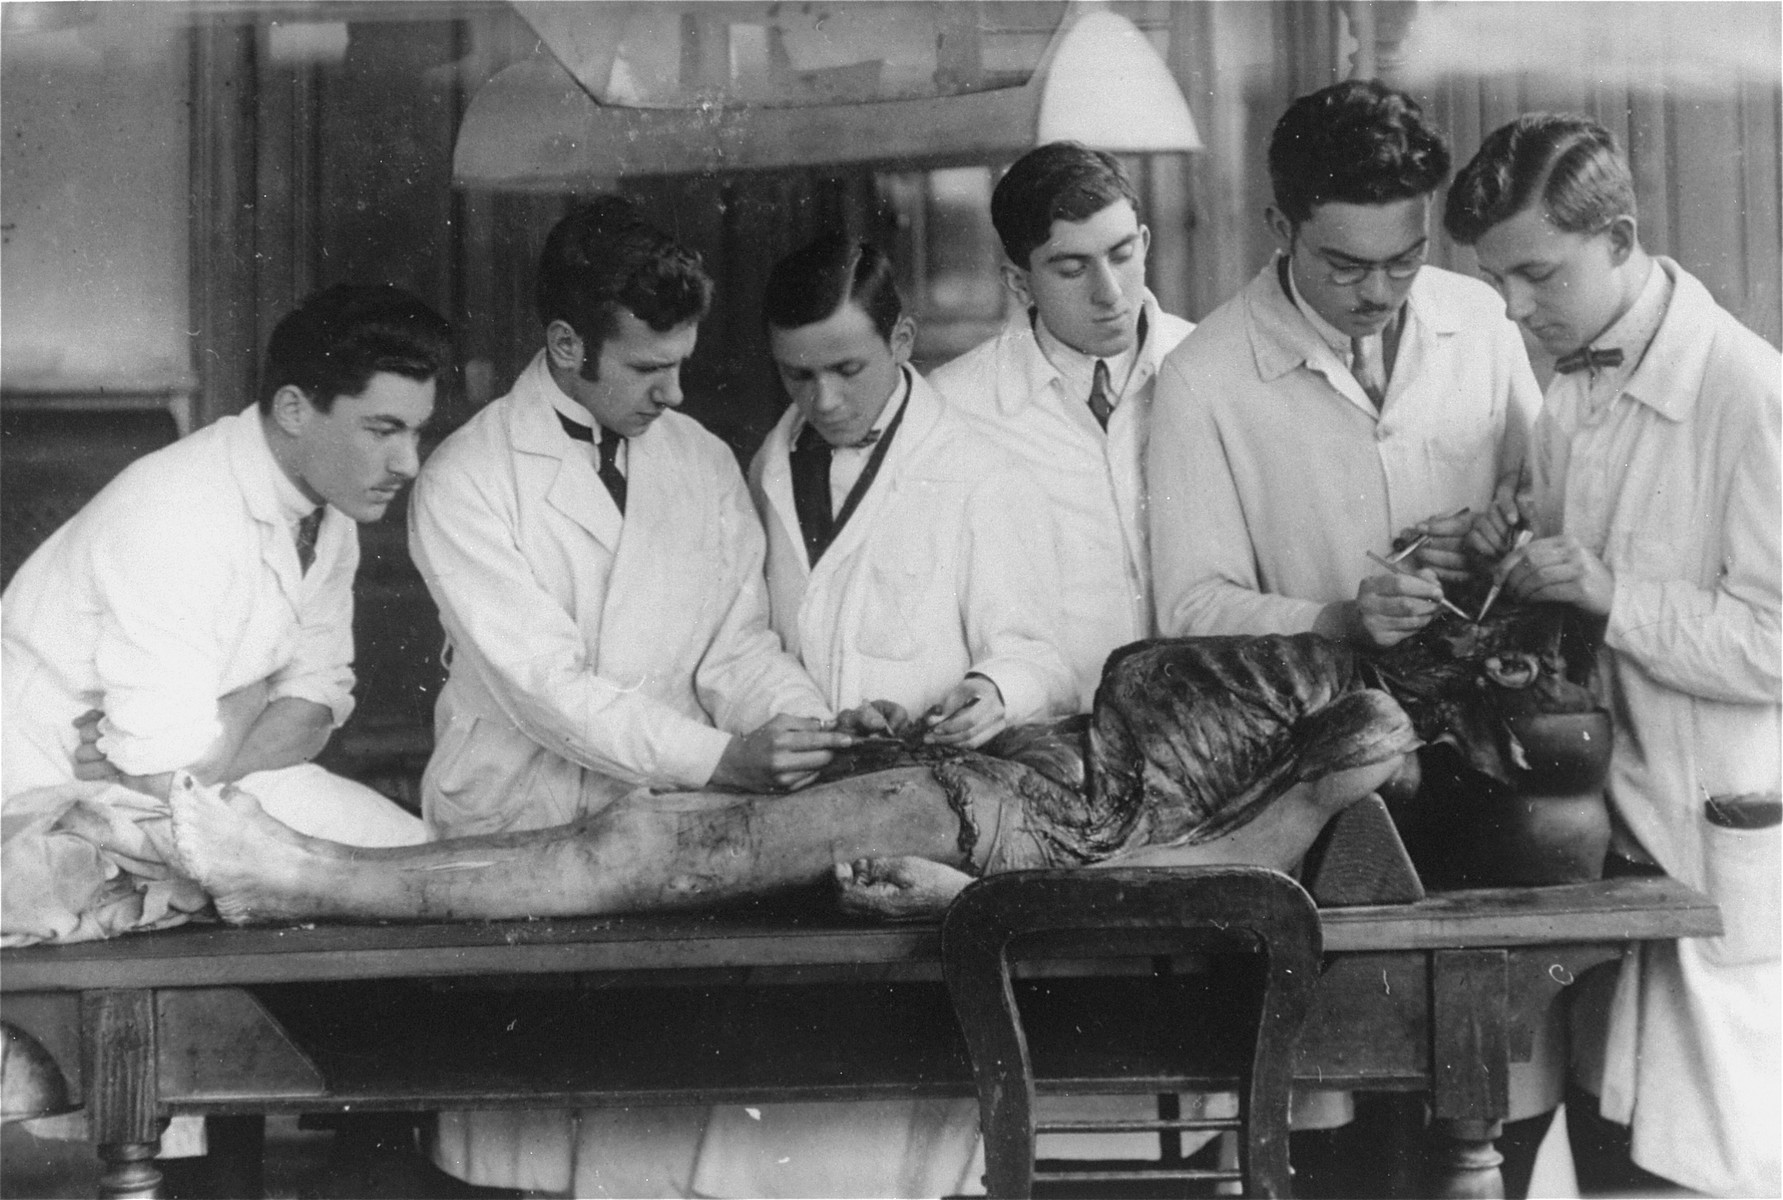 Medical students examine a cadaver at the Charles University in Prague.